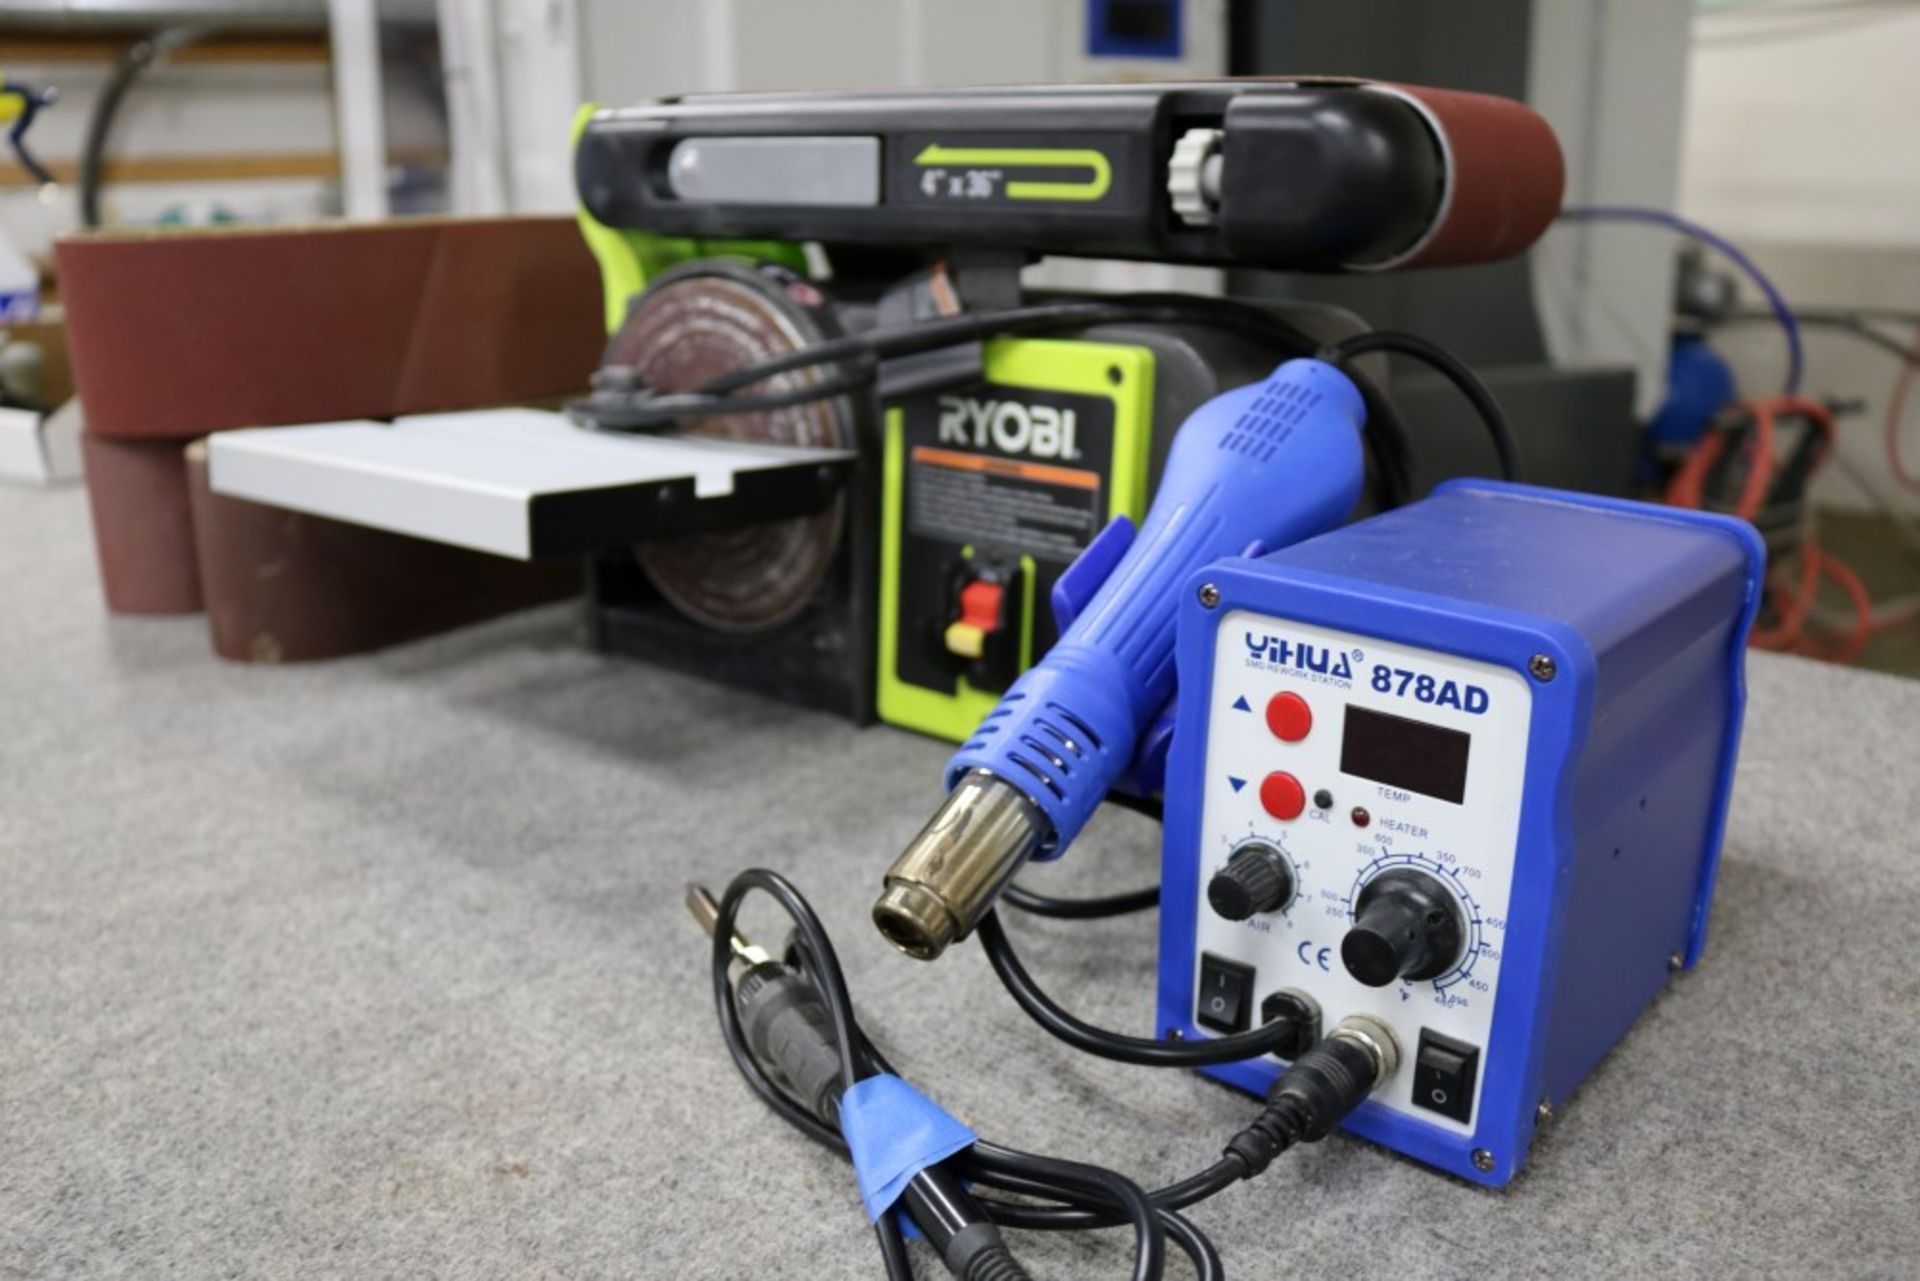 Ryobi 4" x 6" Belt and Disc Sander with Extra New Sanding Belts, also YiHua 878 AD- SMD ReWork - Image 4 of 9